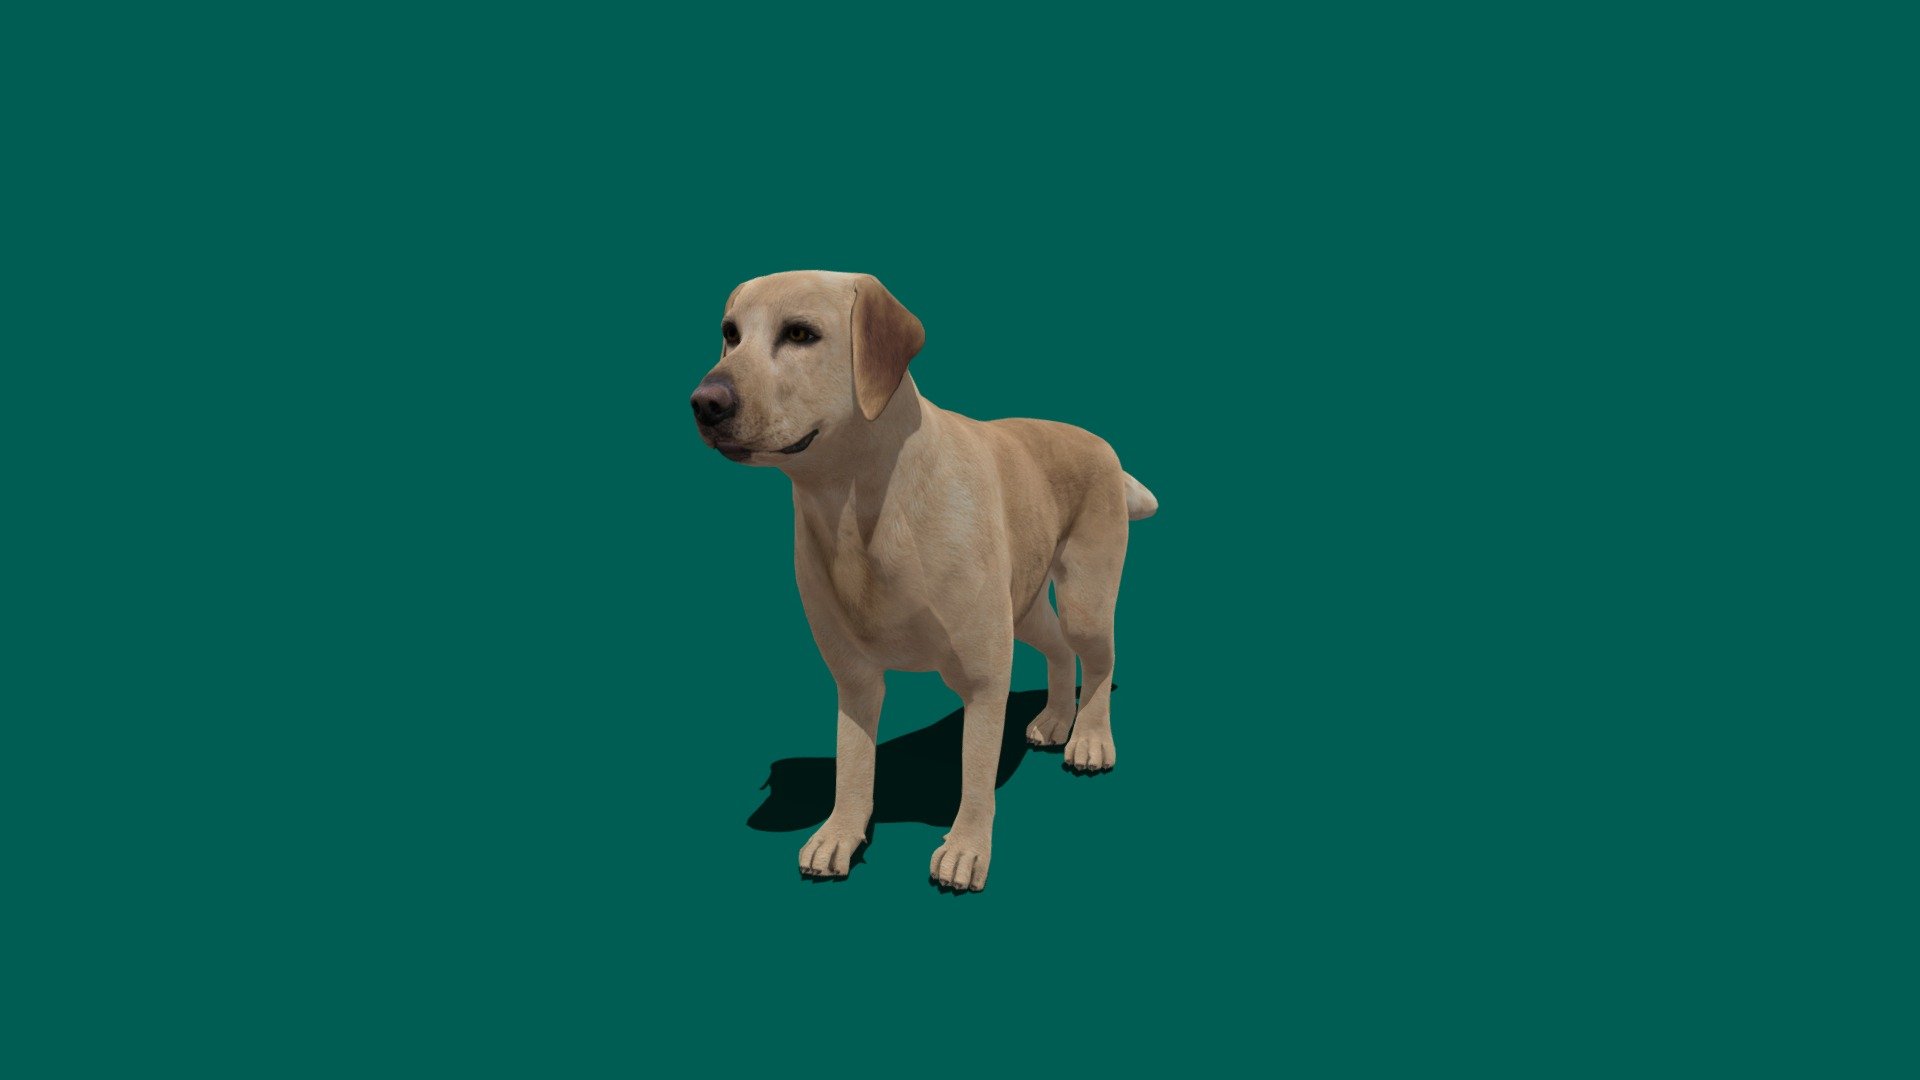 for LabradorRetriever for store
The Labrador Retriever or simply Labrador is a British breed of retriever gun dog. It was developed in the United Kingdom from fishing dogs imported from the colony of Newfoundland, and was named after the Labrador region of that colony 3d model